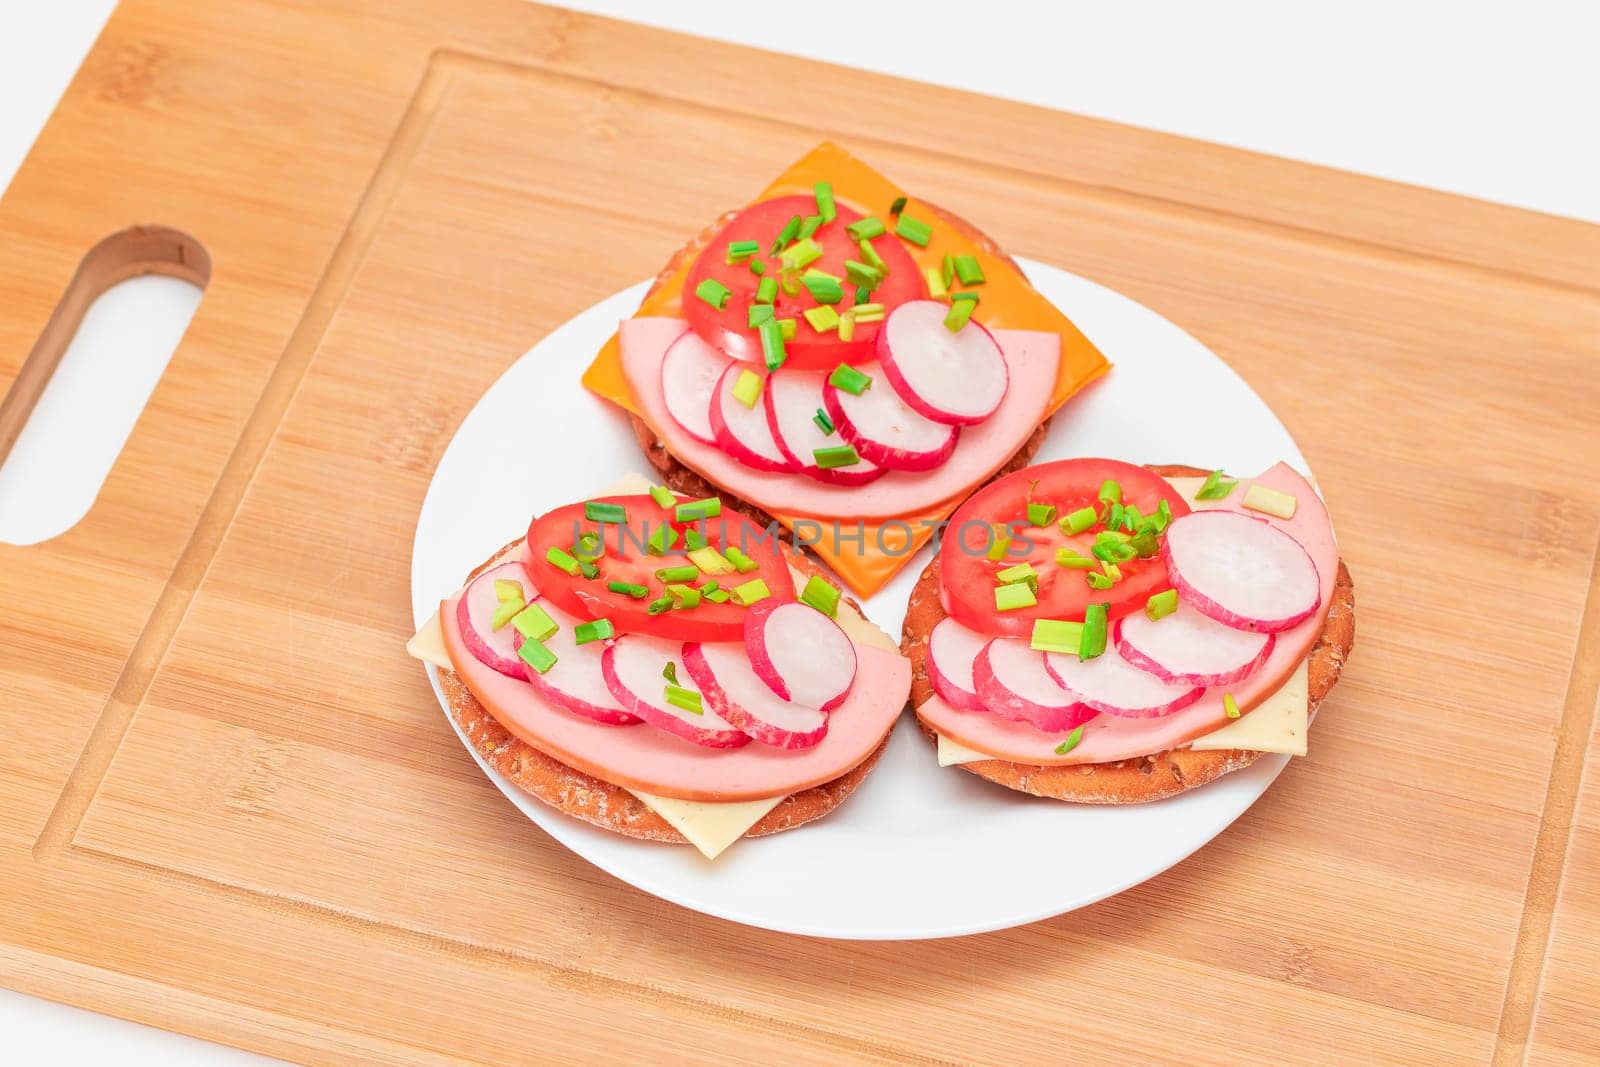 Crispy Cracker Sandwiches with Tomato, Sausage, Cheese, Green Onions and Radish on White Plate. Easy Breakfast. Quick and Healthy Sandwiches. Crispbread with Tasty Filling. Healthy Dietary Snack